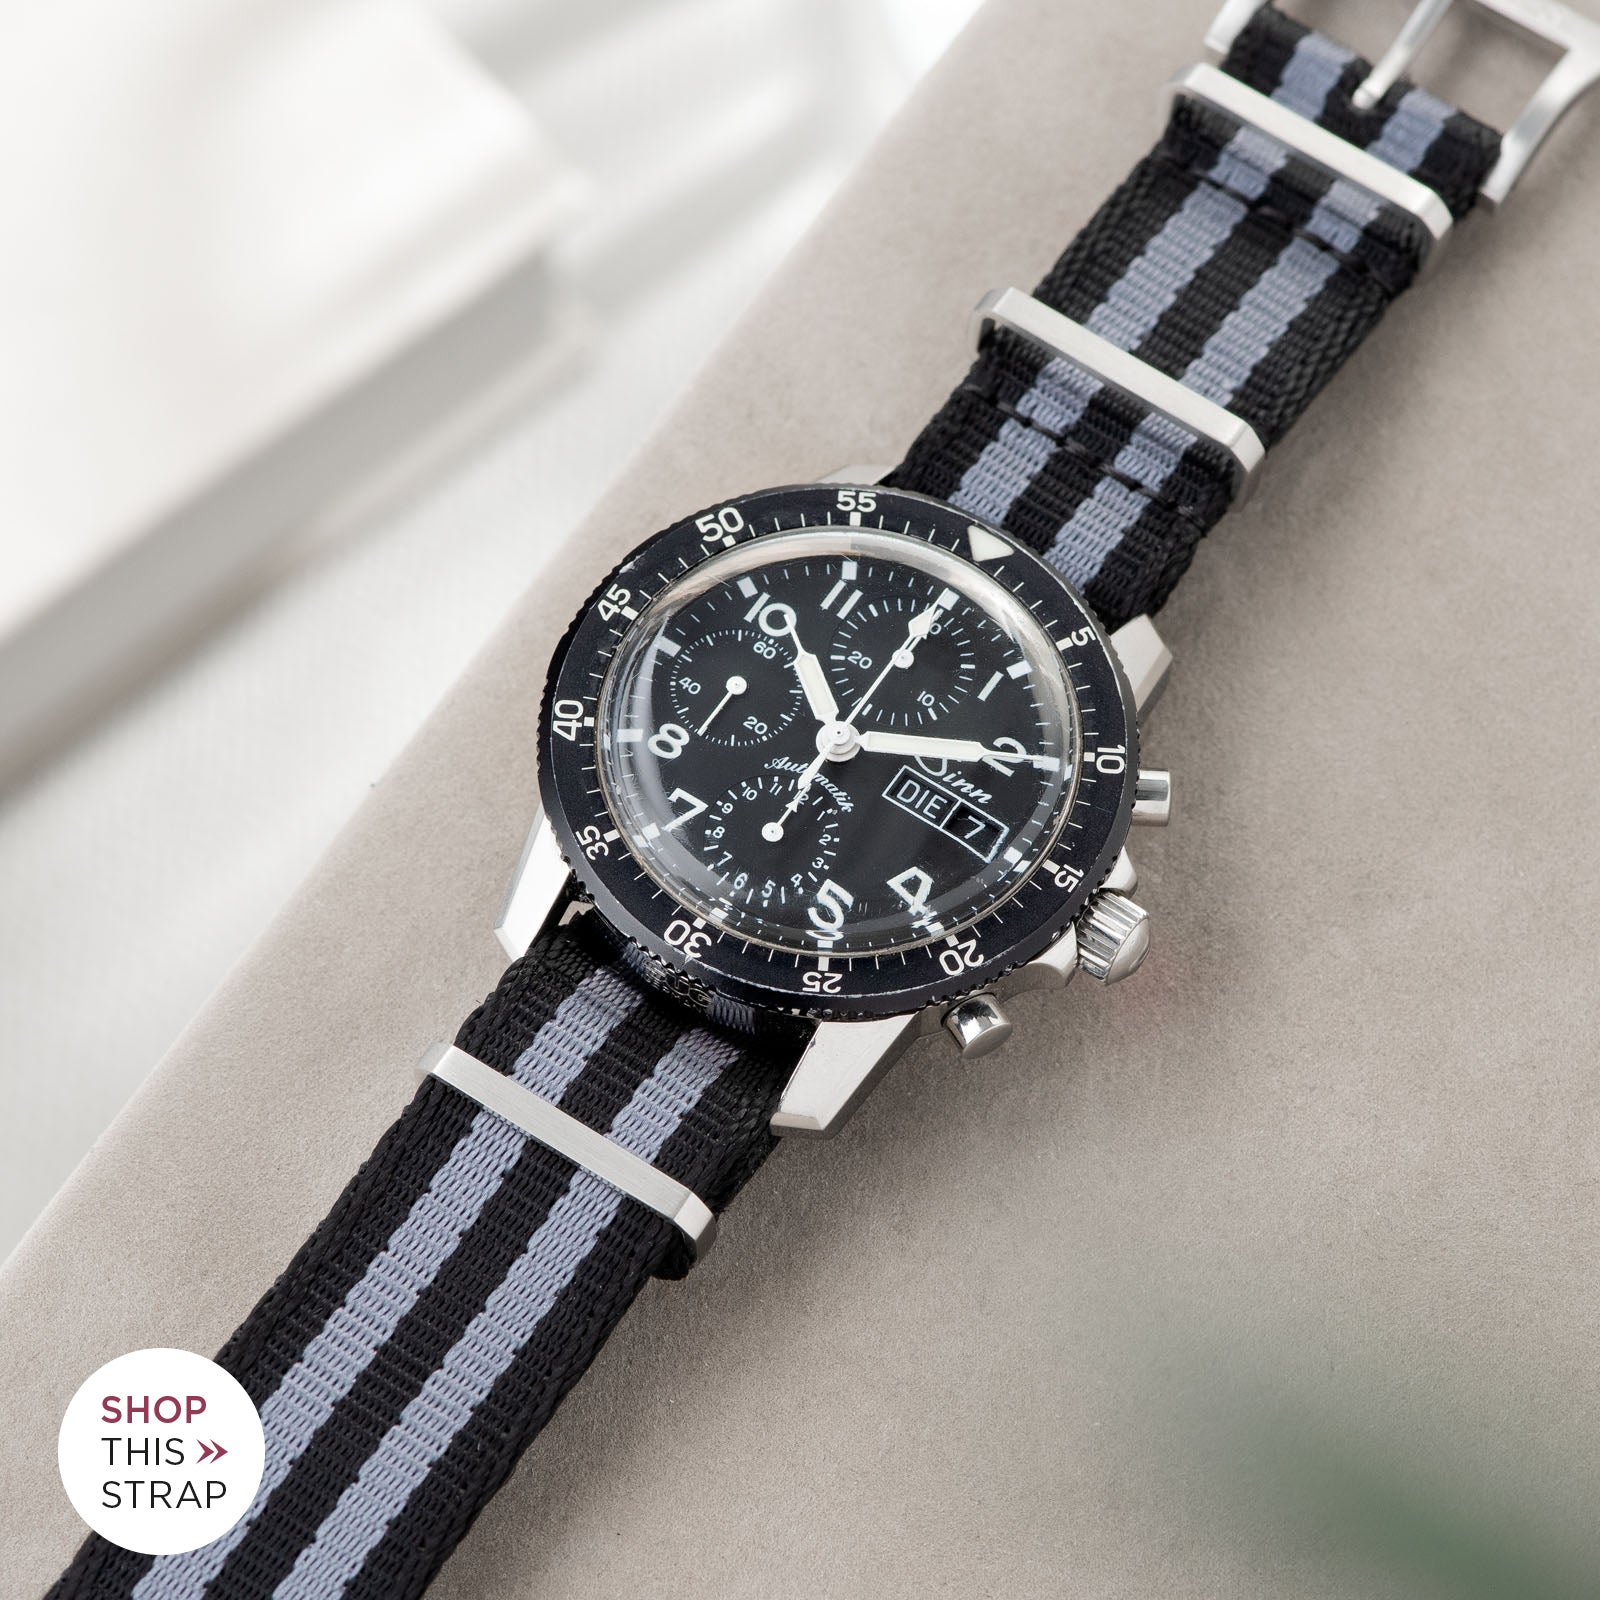 Bulang and Sons_Strap Guide_Sinn 103St Flieder Chronograph_Deluxe Nylon Nato Watch Strap Black Two Stripes Grey